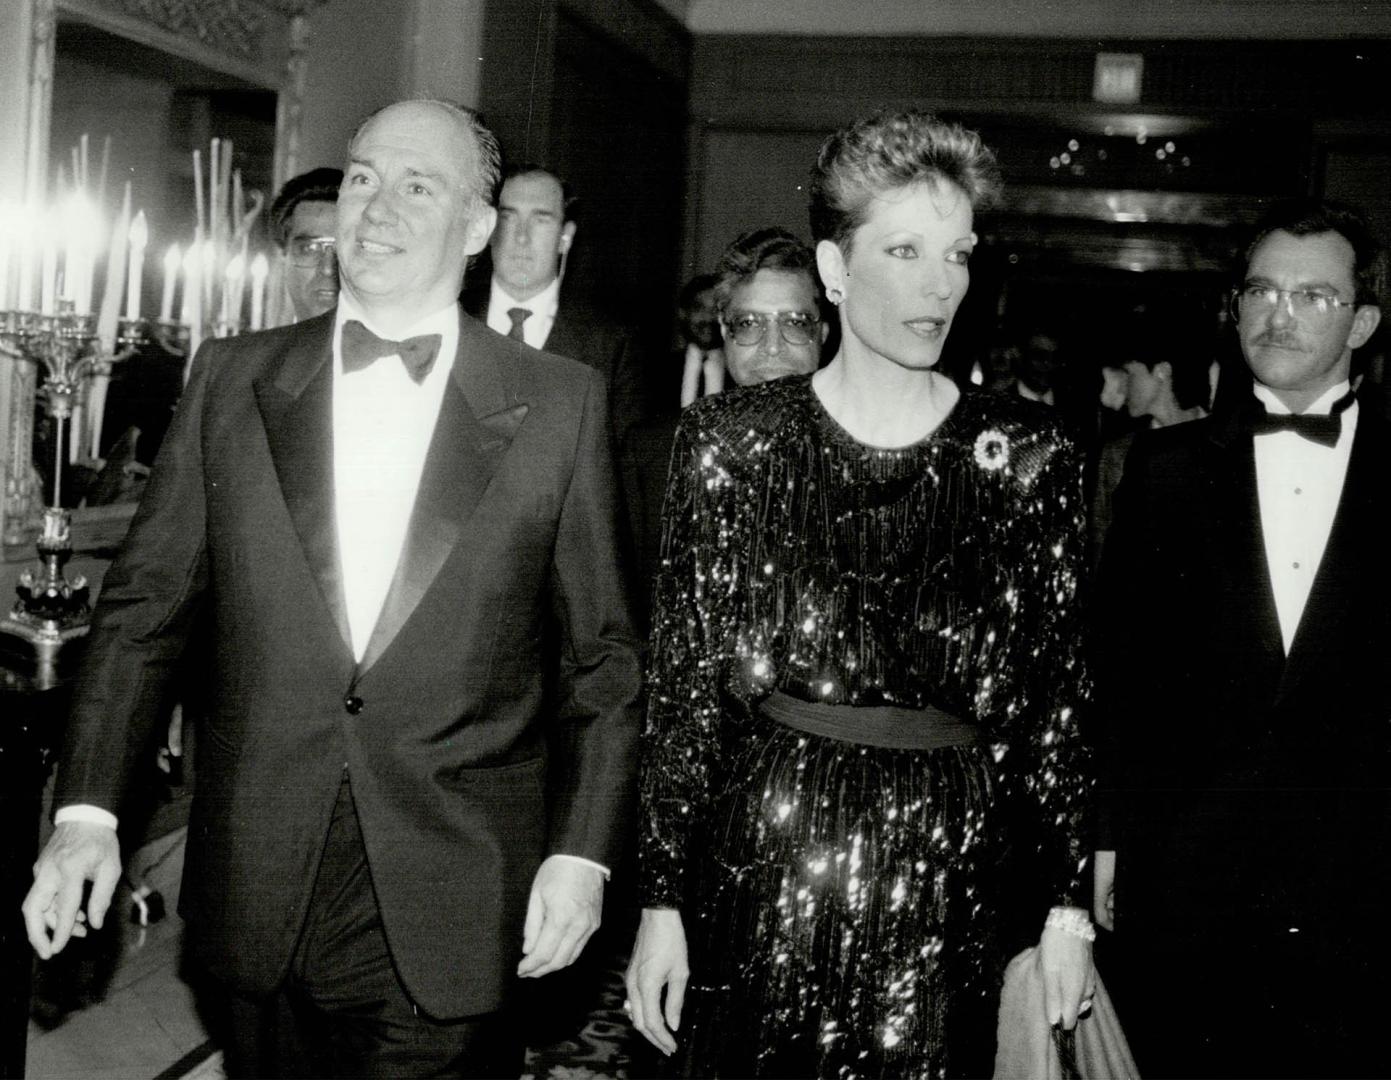 In Toronto last year, the Aga Khan and his wife Begum Salinah attended a banquet in their honor